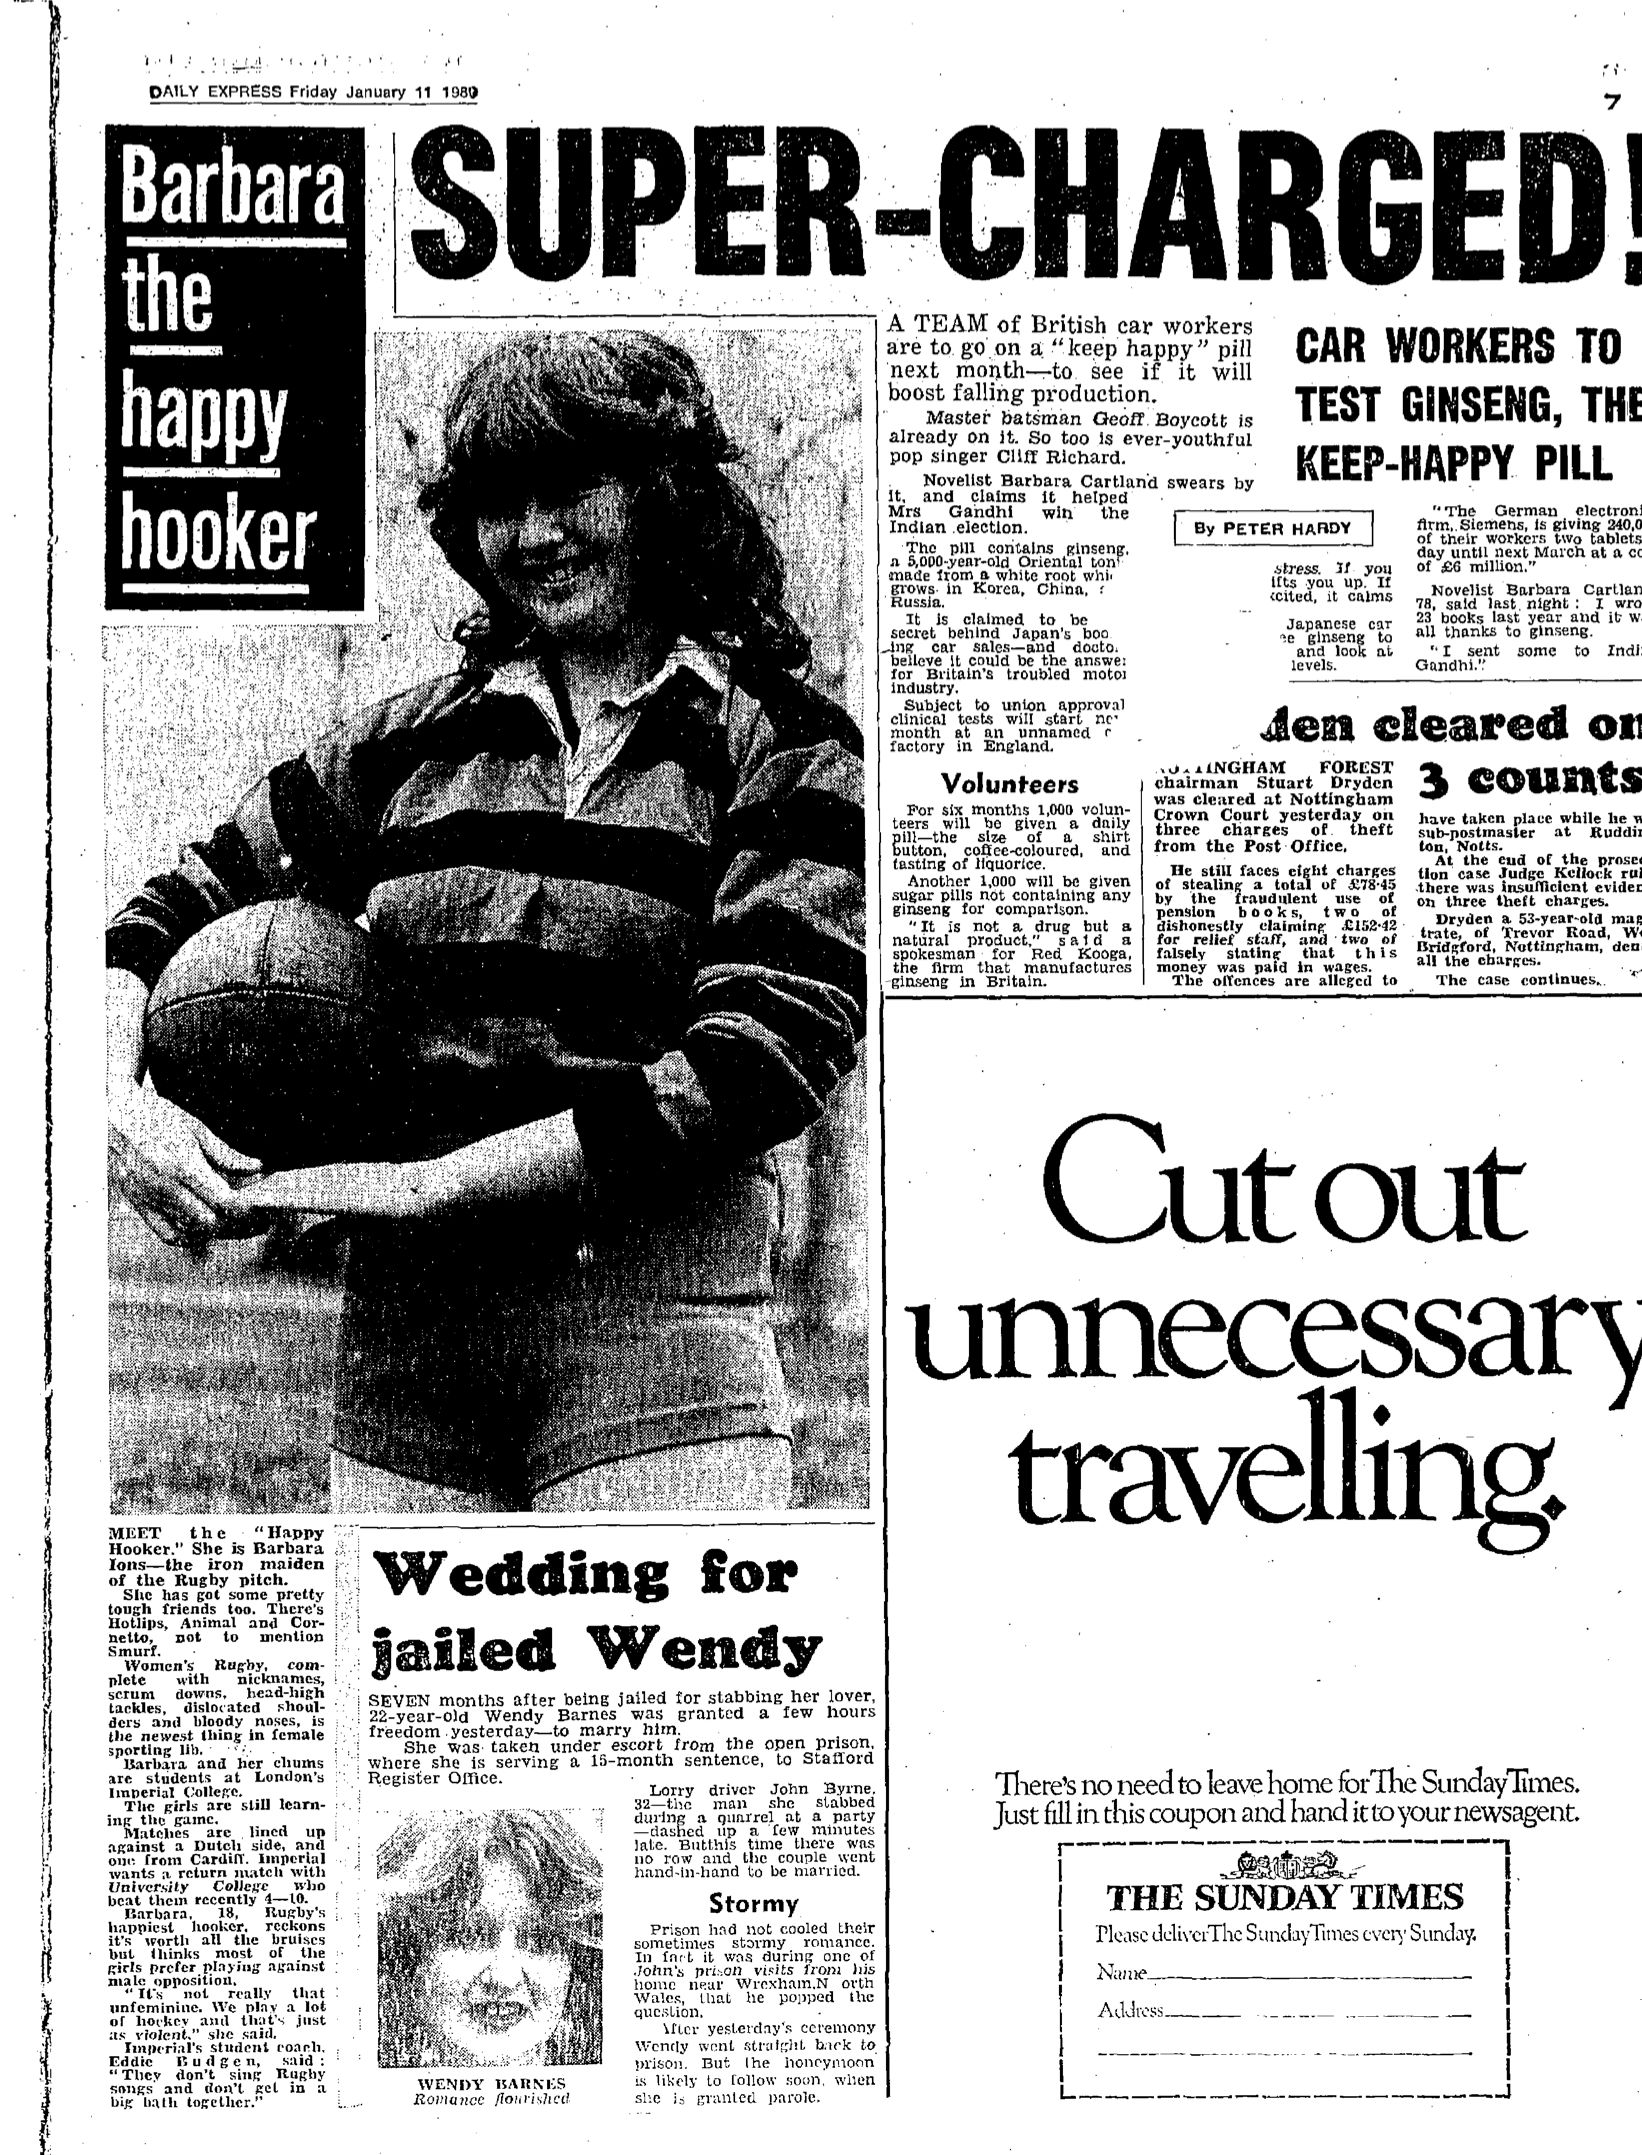 Article on Imperial Ladies' Rugby taken from the Daily Express